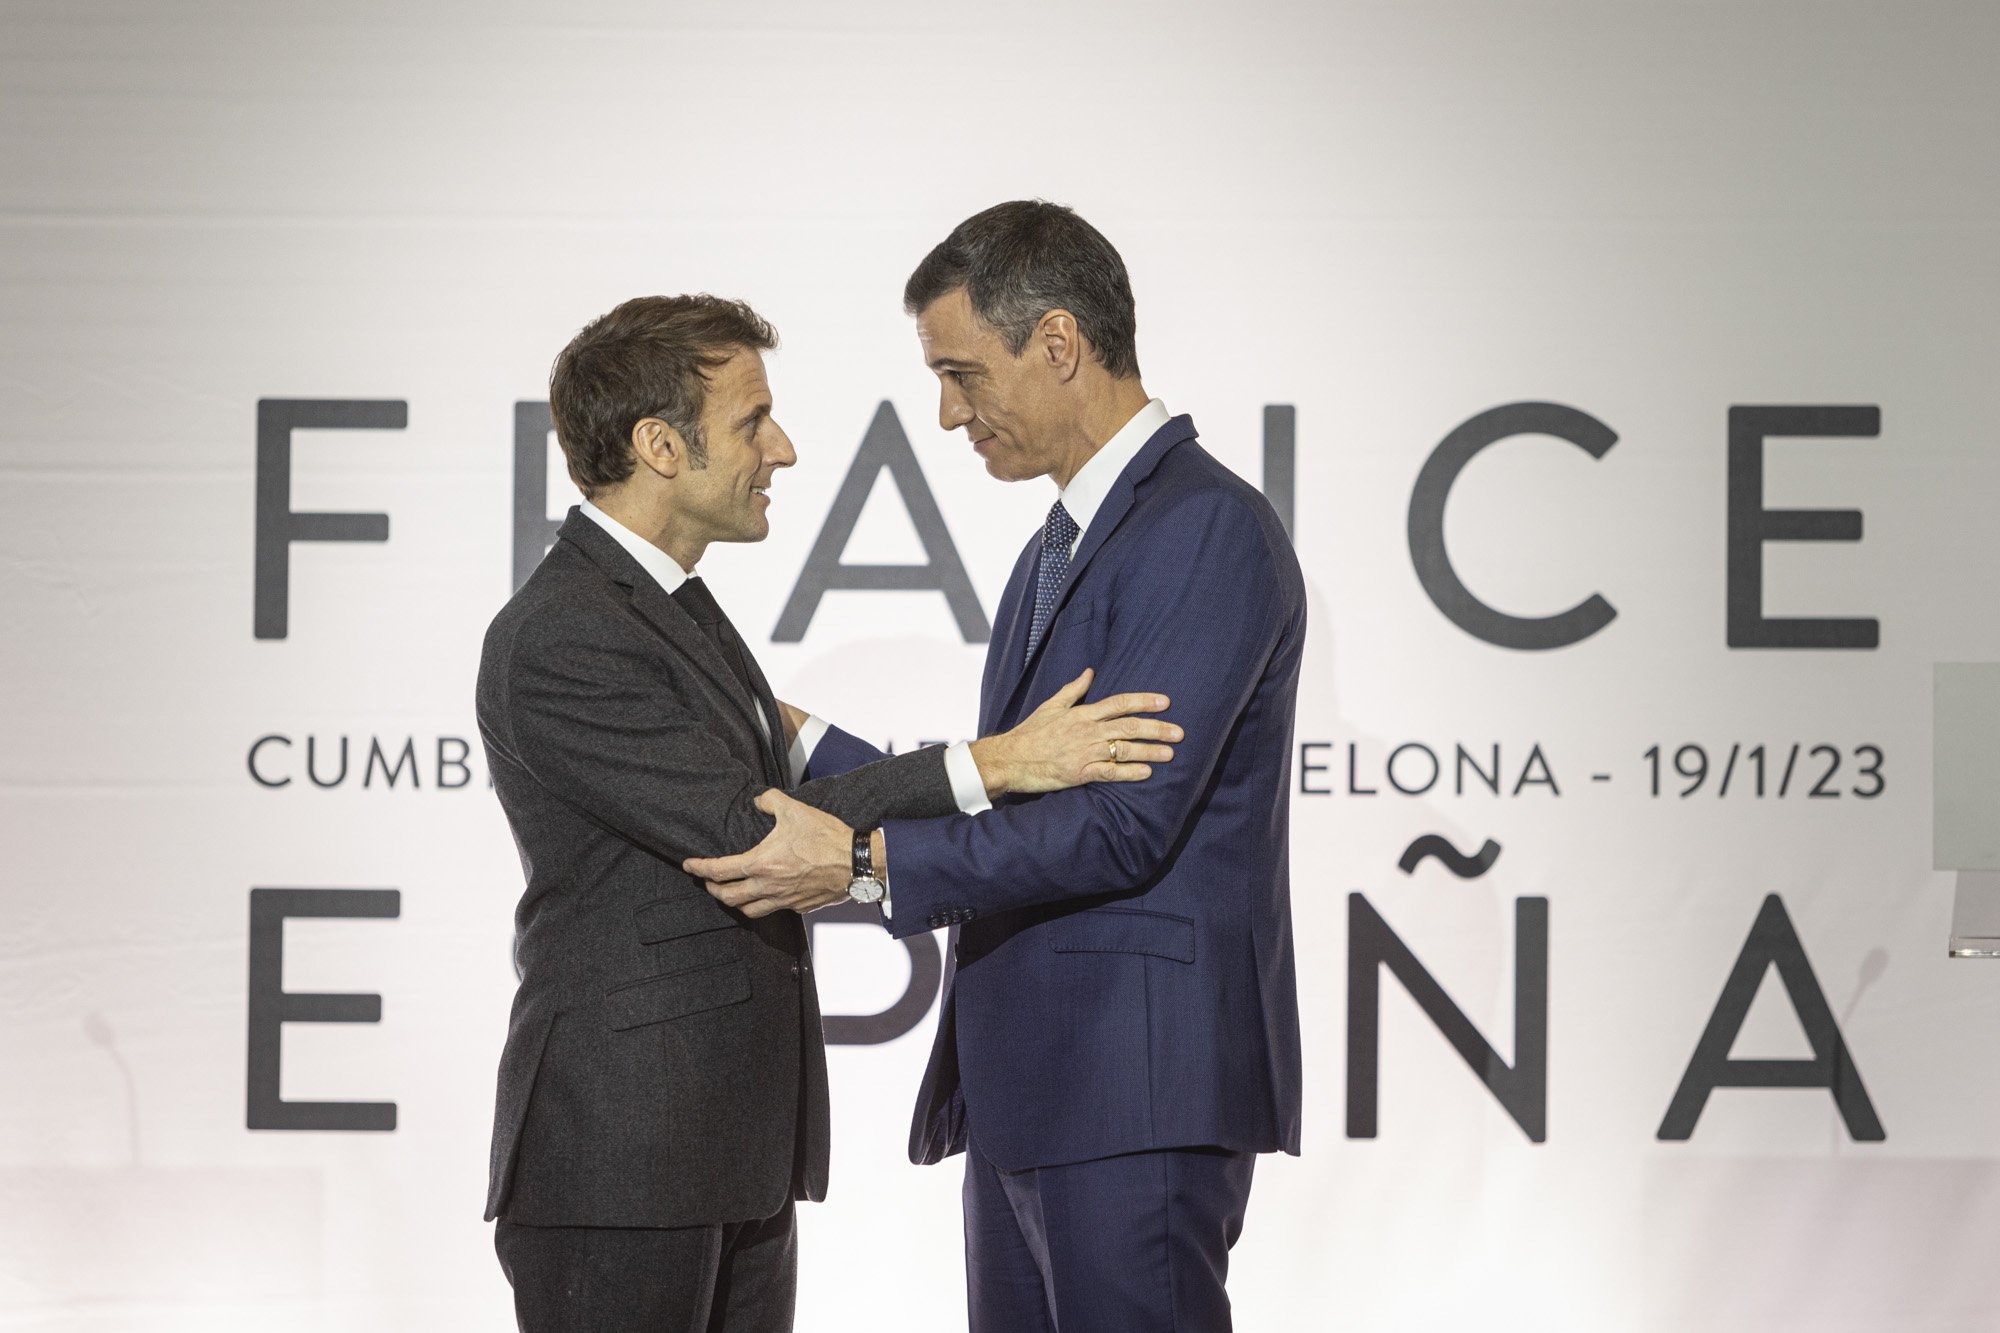 Sánchez thanks Aragonès for summit welcome: "The Constitution is complied with in Catalonia"